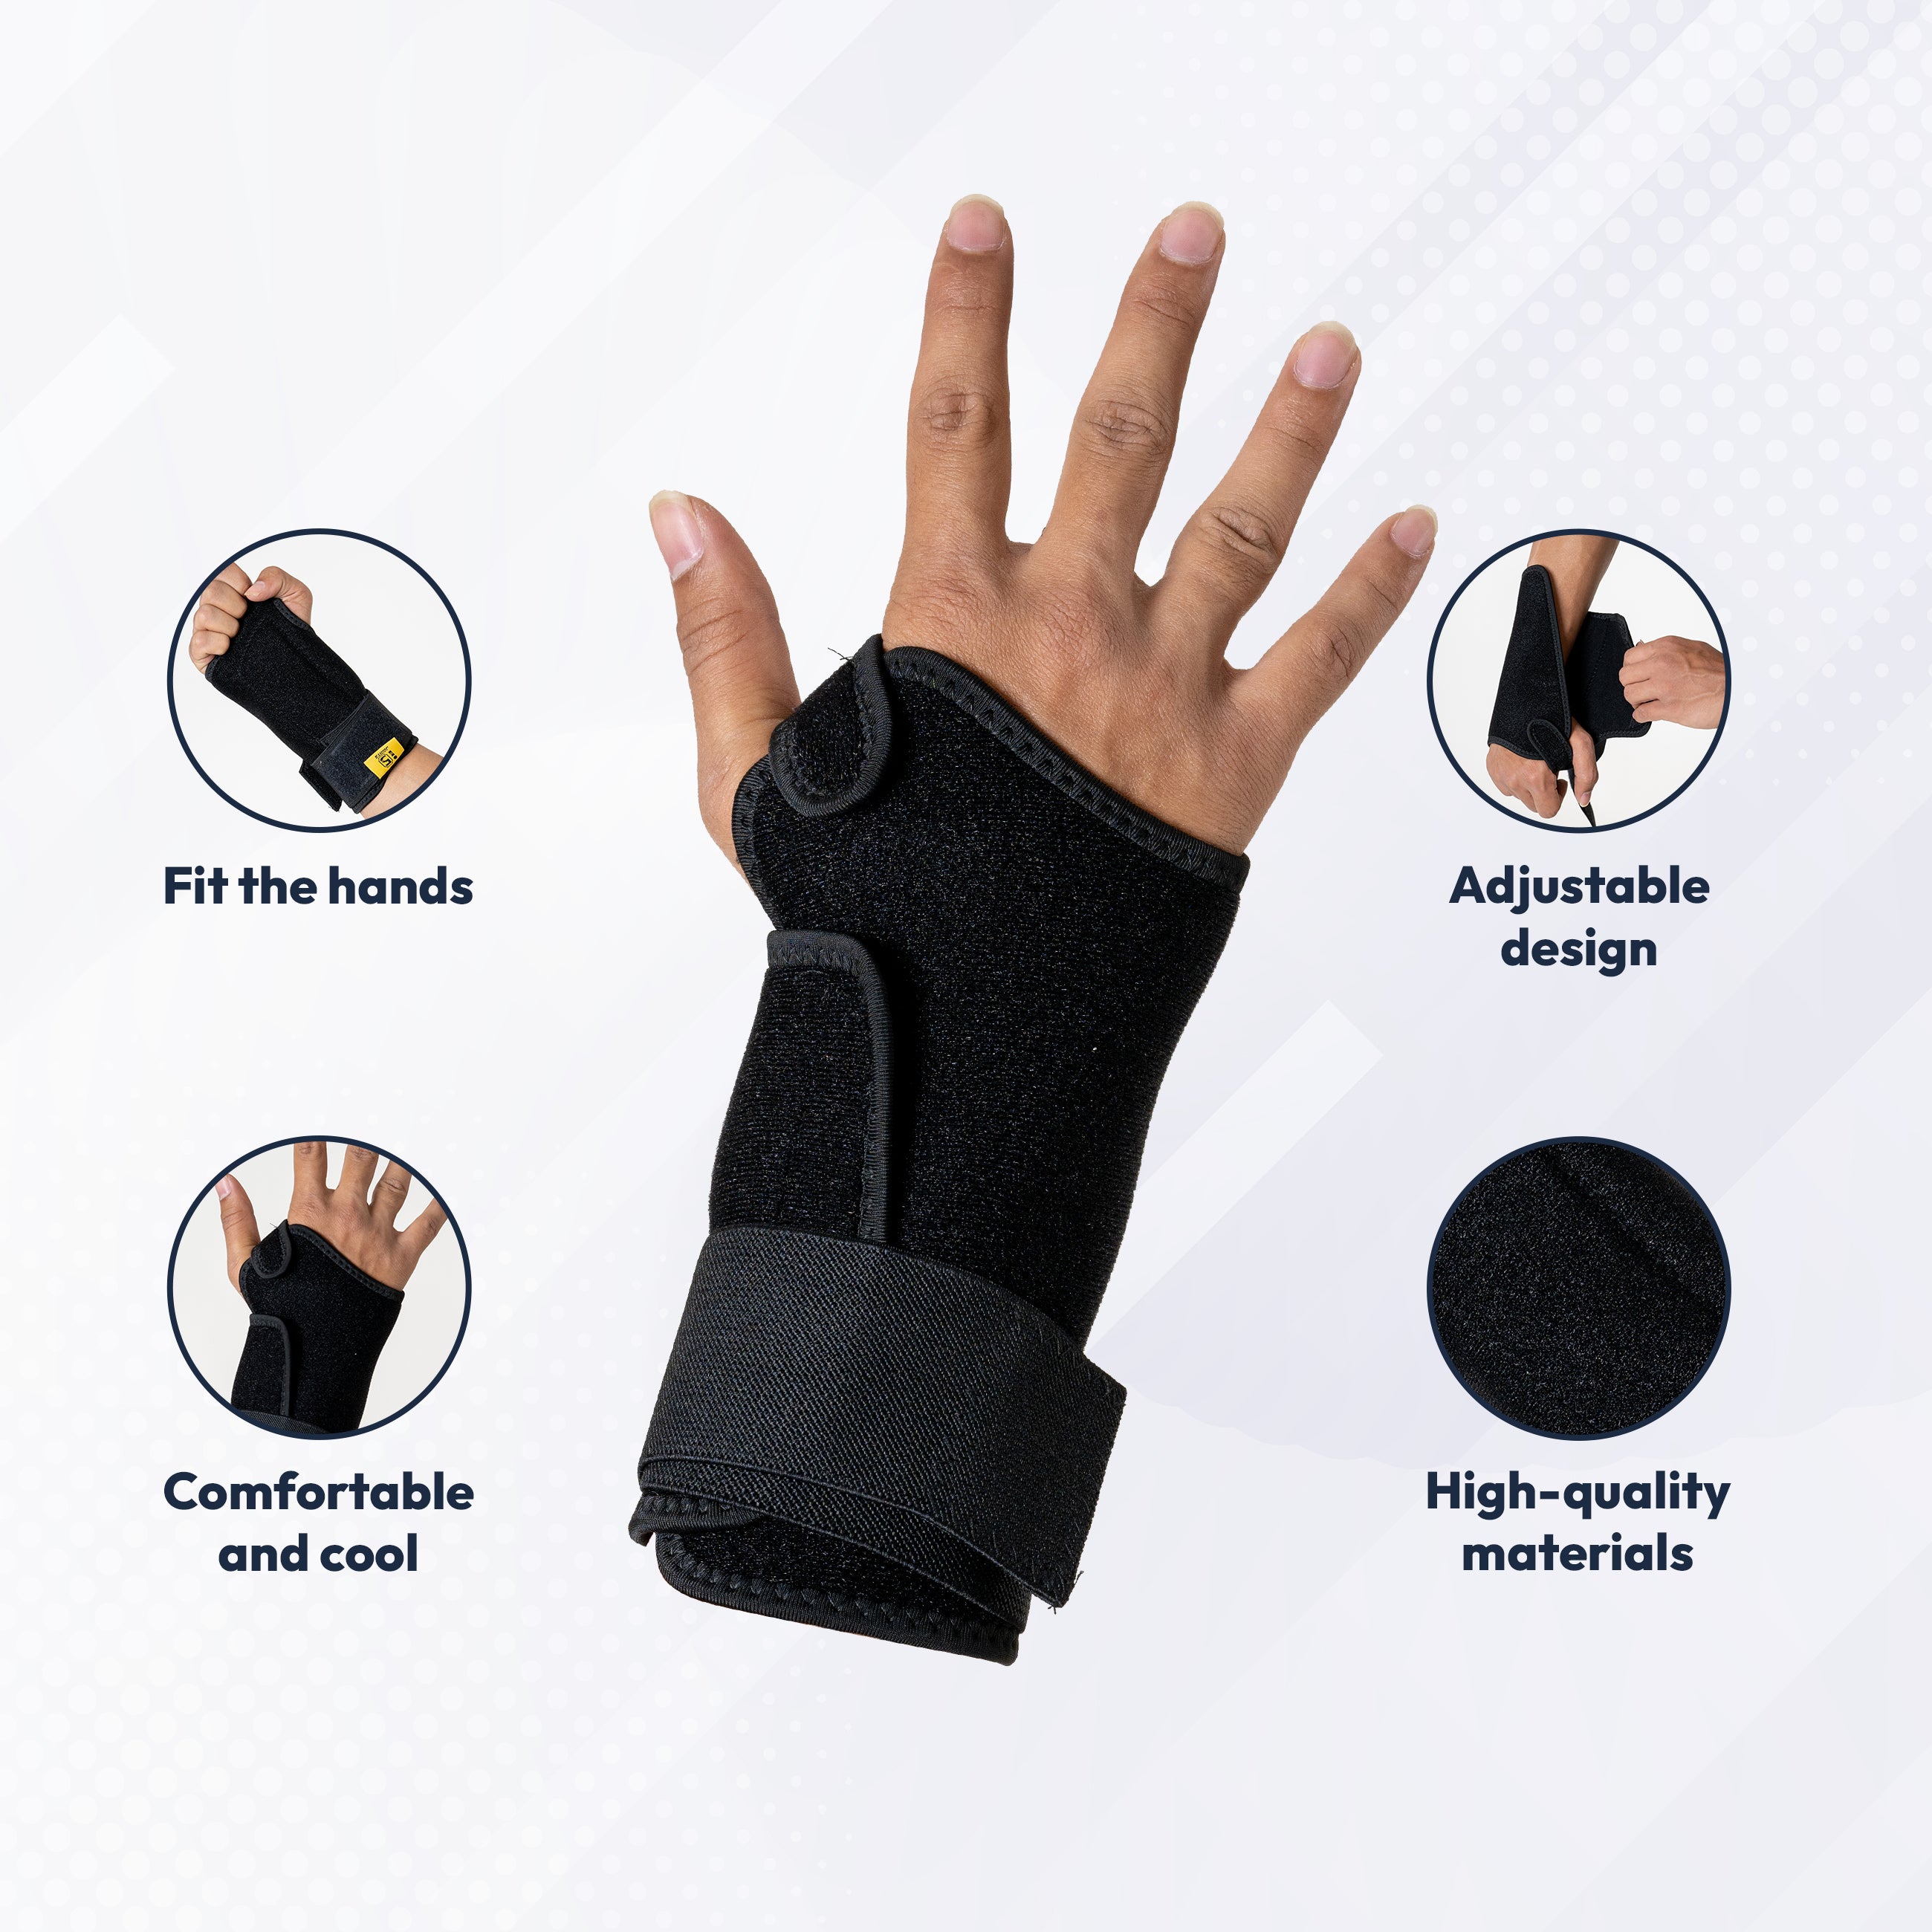 I5-Carpal Tunnel Brace(Carpal Tunnel Gloves,Joint Pain Relief,Fingerless Compression,Compression Therapy,Anti-Arthritis,Finger Compression,Hand Pain Relief Gloves,Wrist Compression)